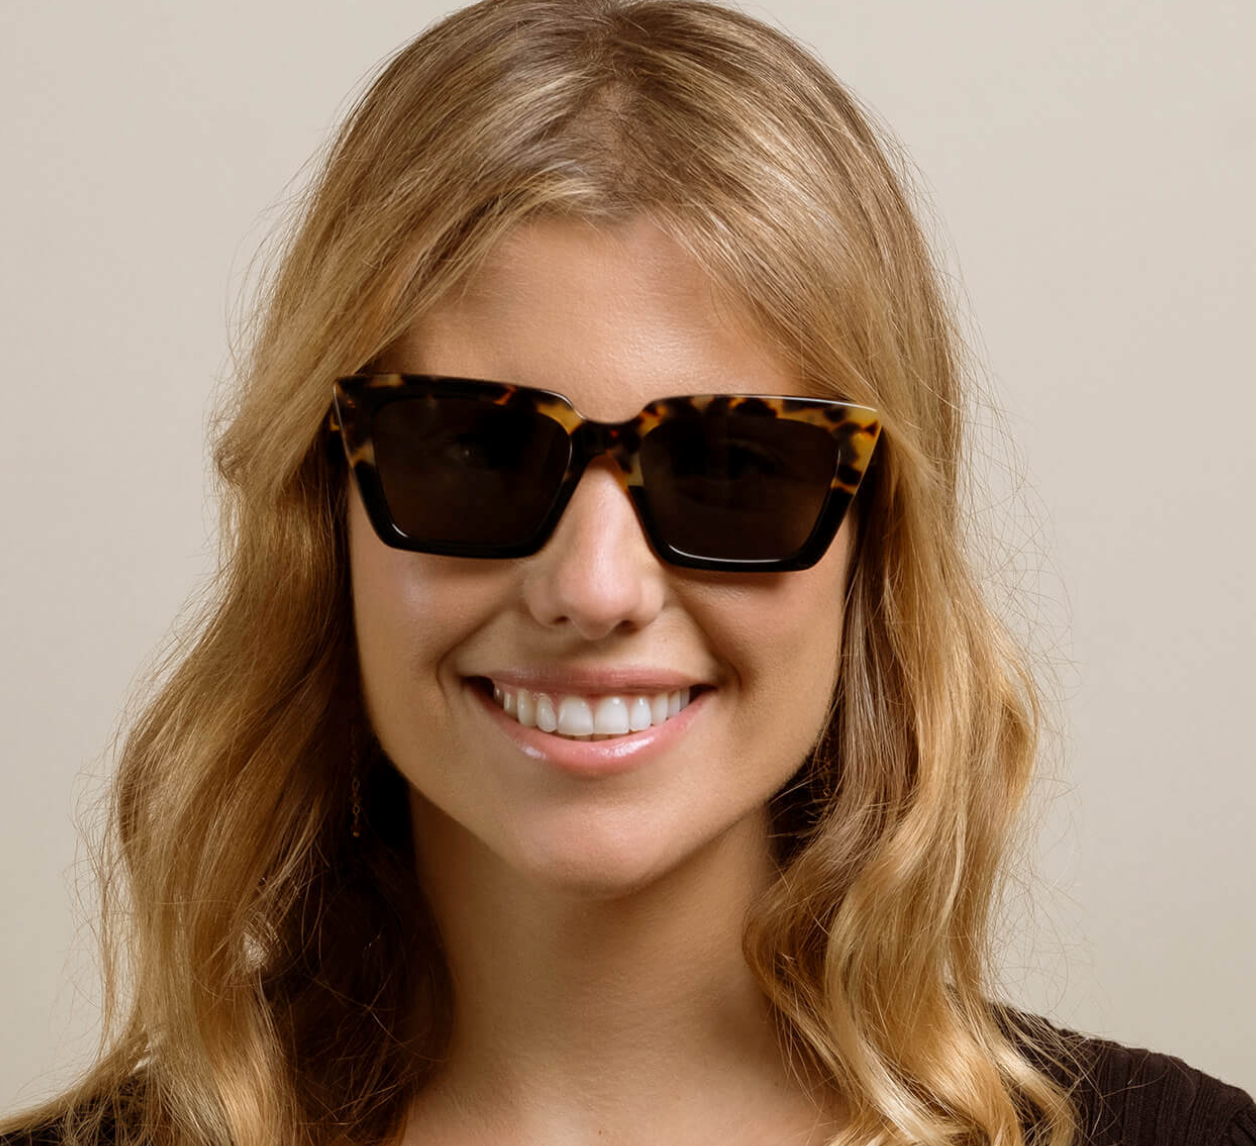 RAEN SUNGLASSES IN Cape Town AT KISS SURF STORE – KEEP IT SIMPLE SURF